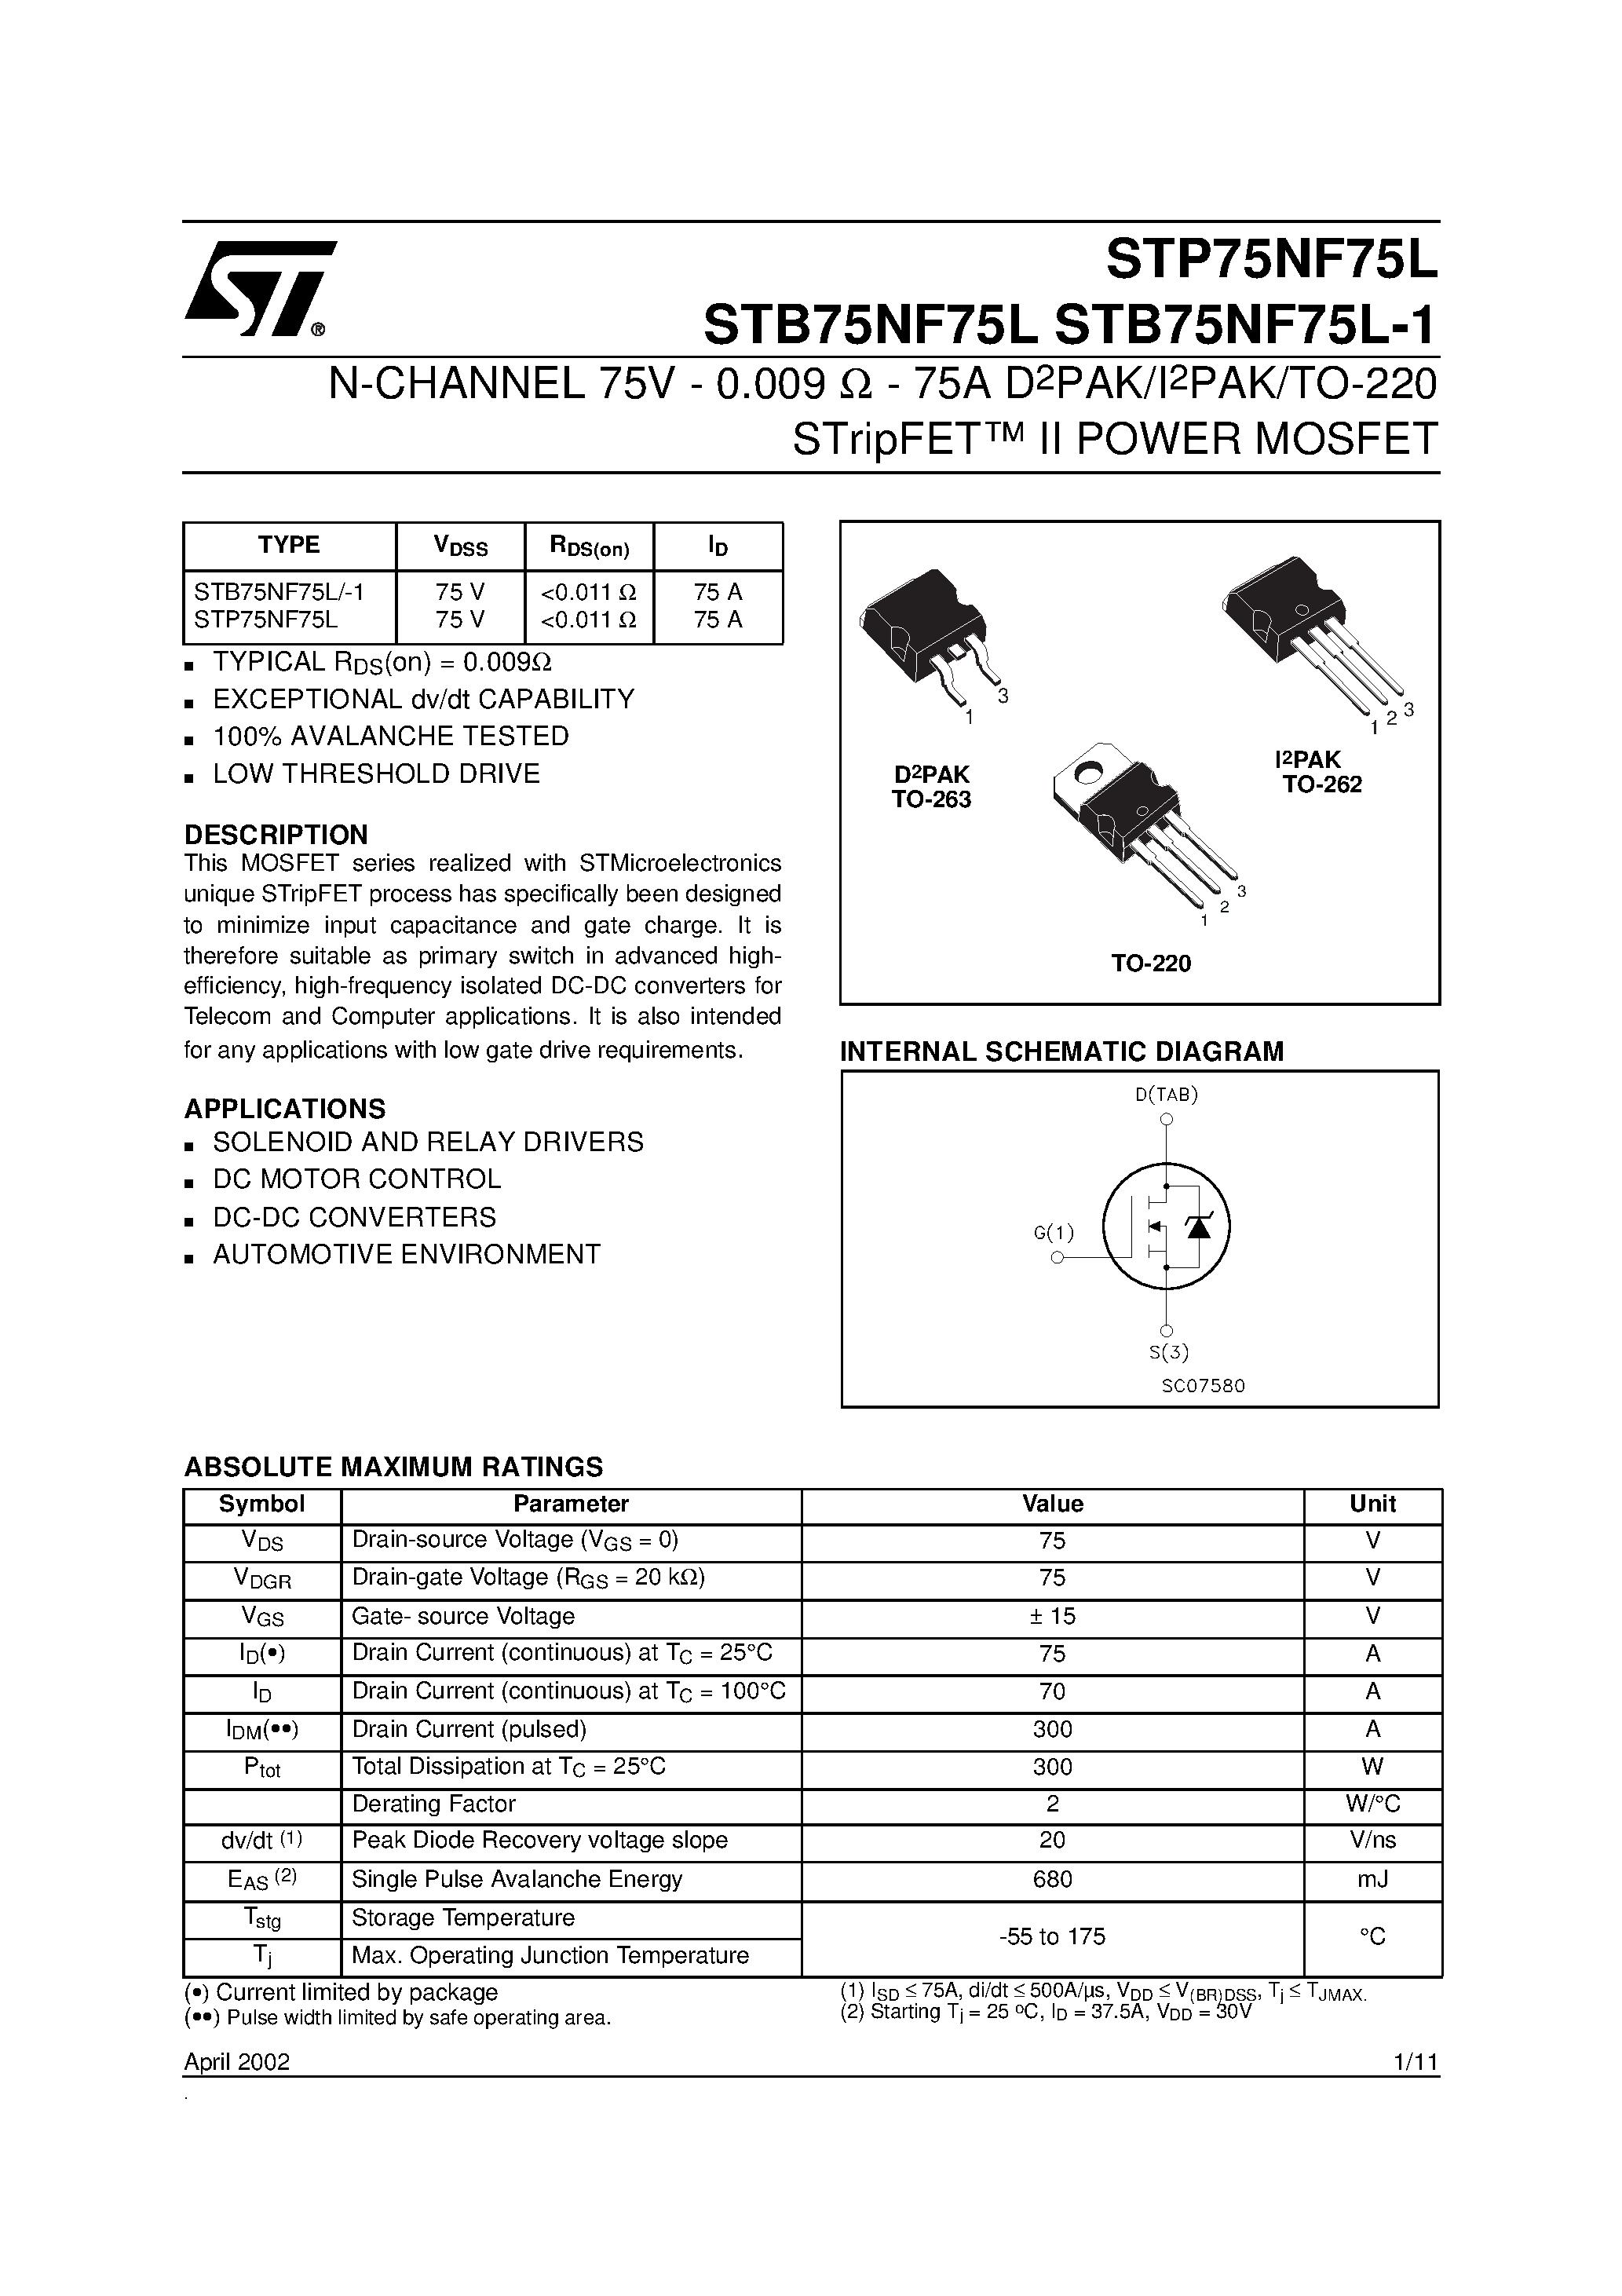 Даташит STB75NF75L - N-CHANNEL MOSFET страница 1